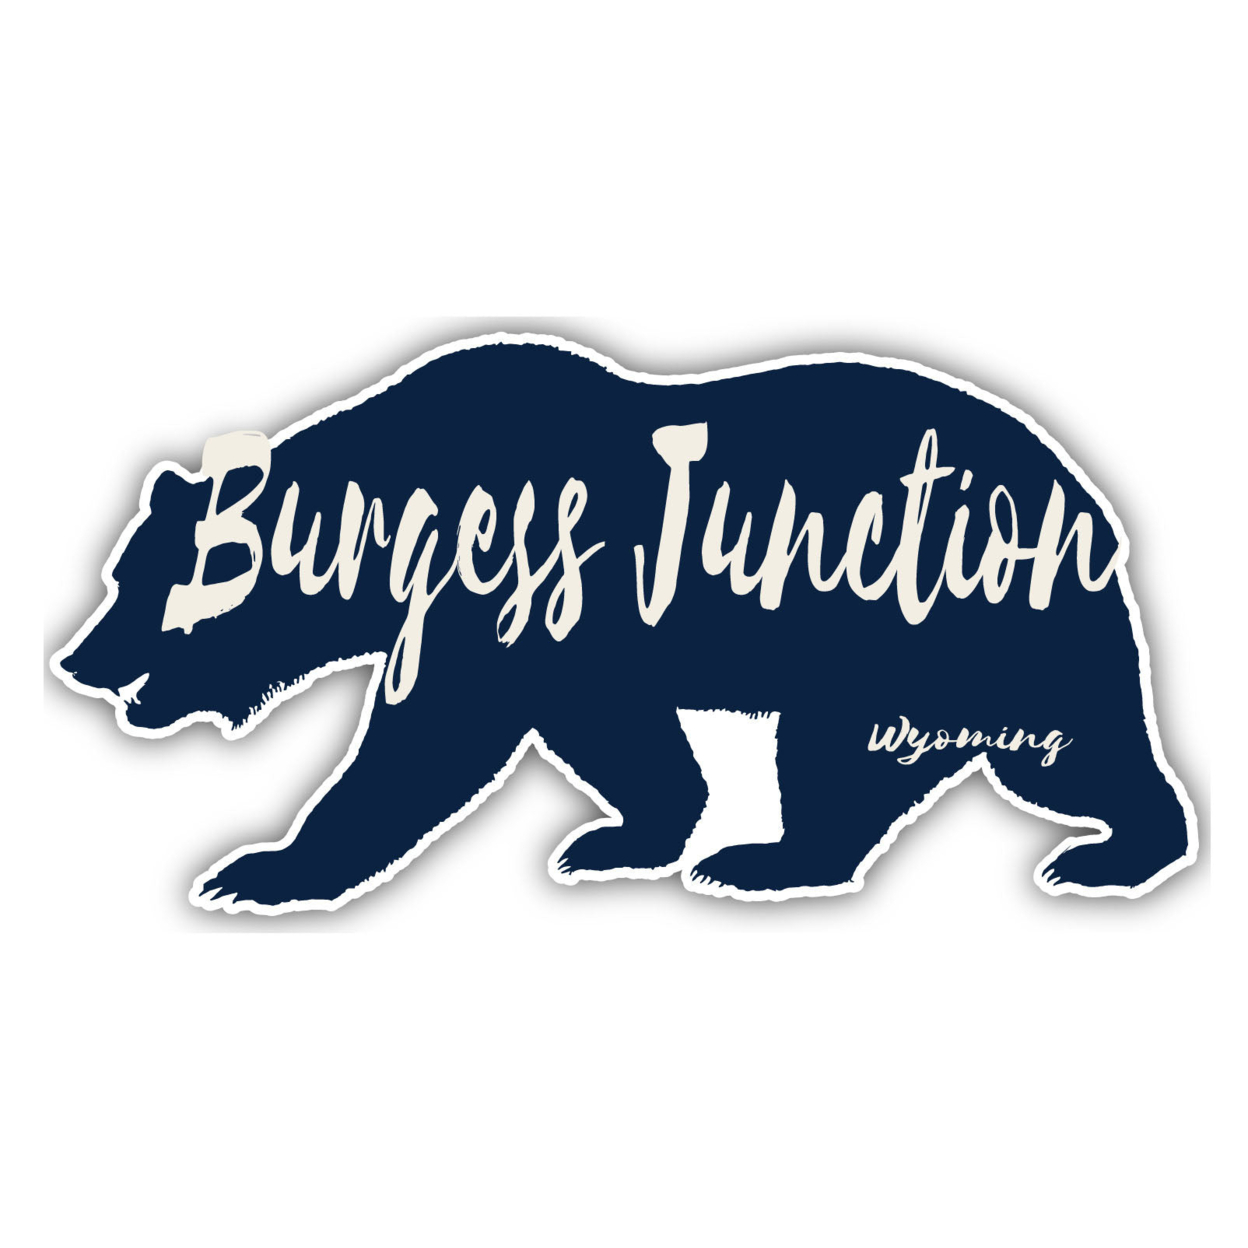 Burgess Junction Wyoming Souvenir Decorative Stickers (Choose Theme And Size) - 4-Pack, 8-Inch, Bear